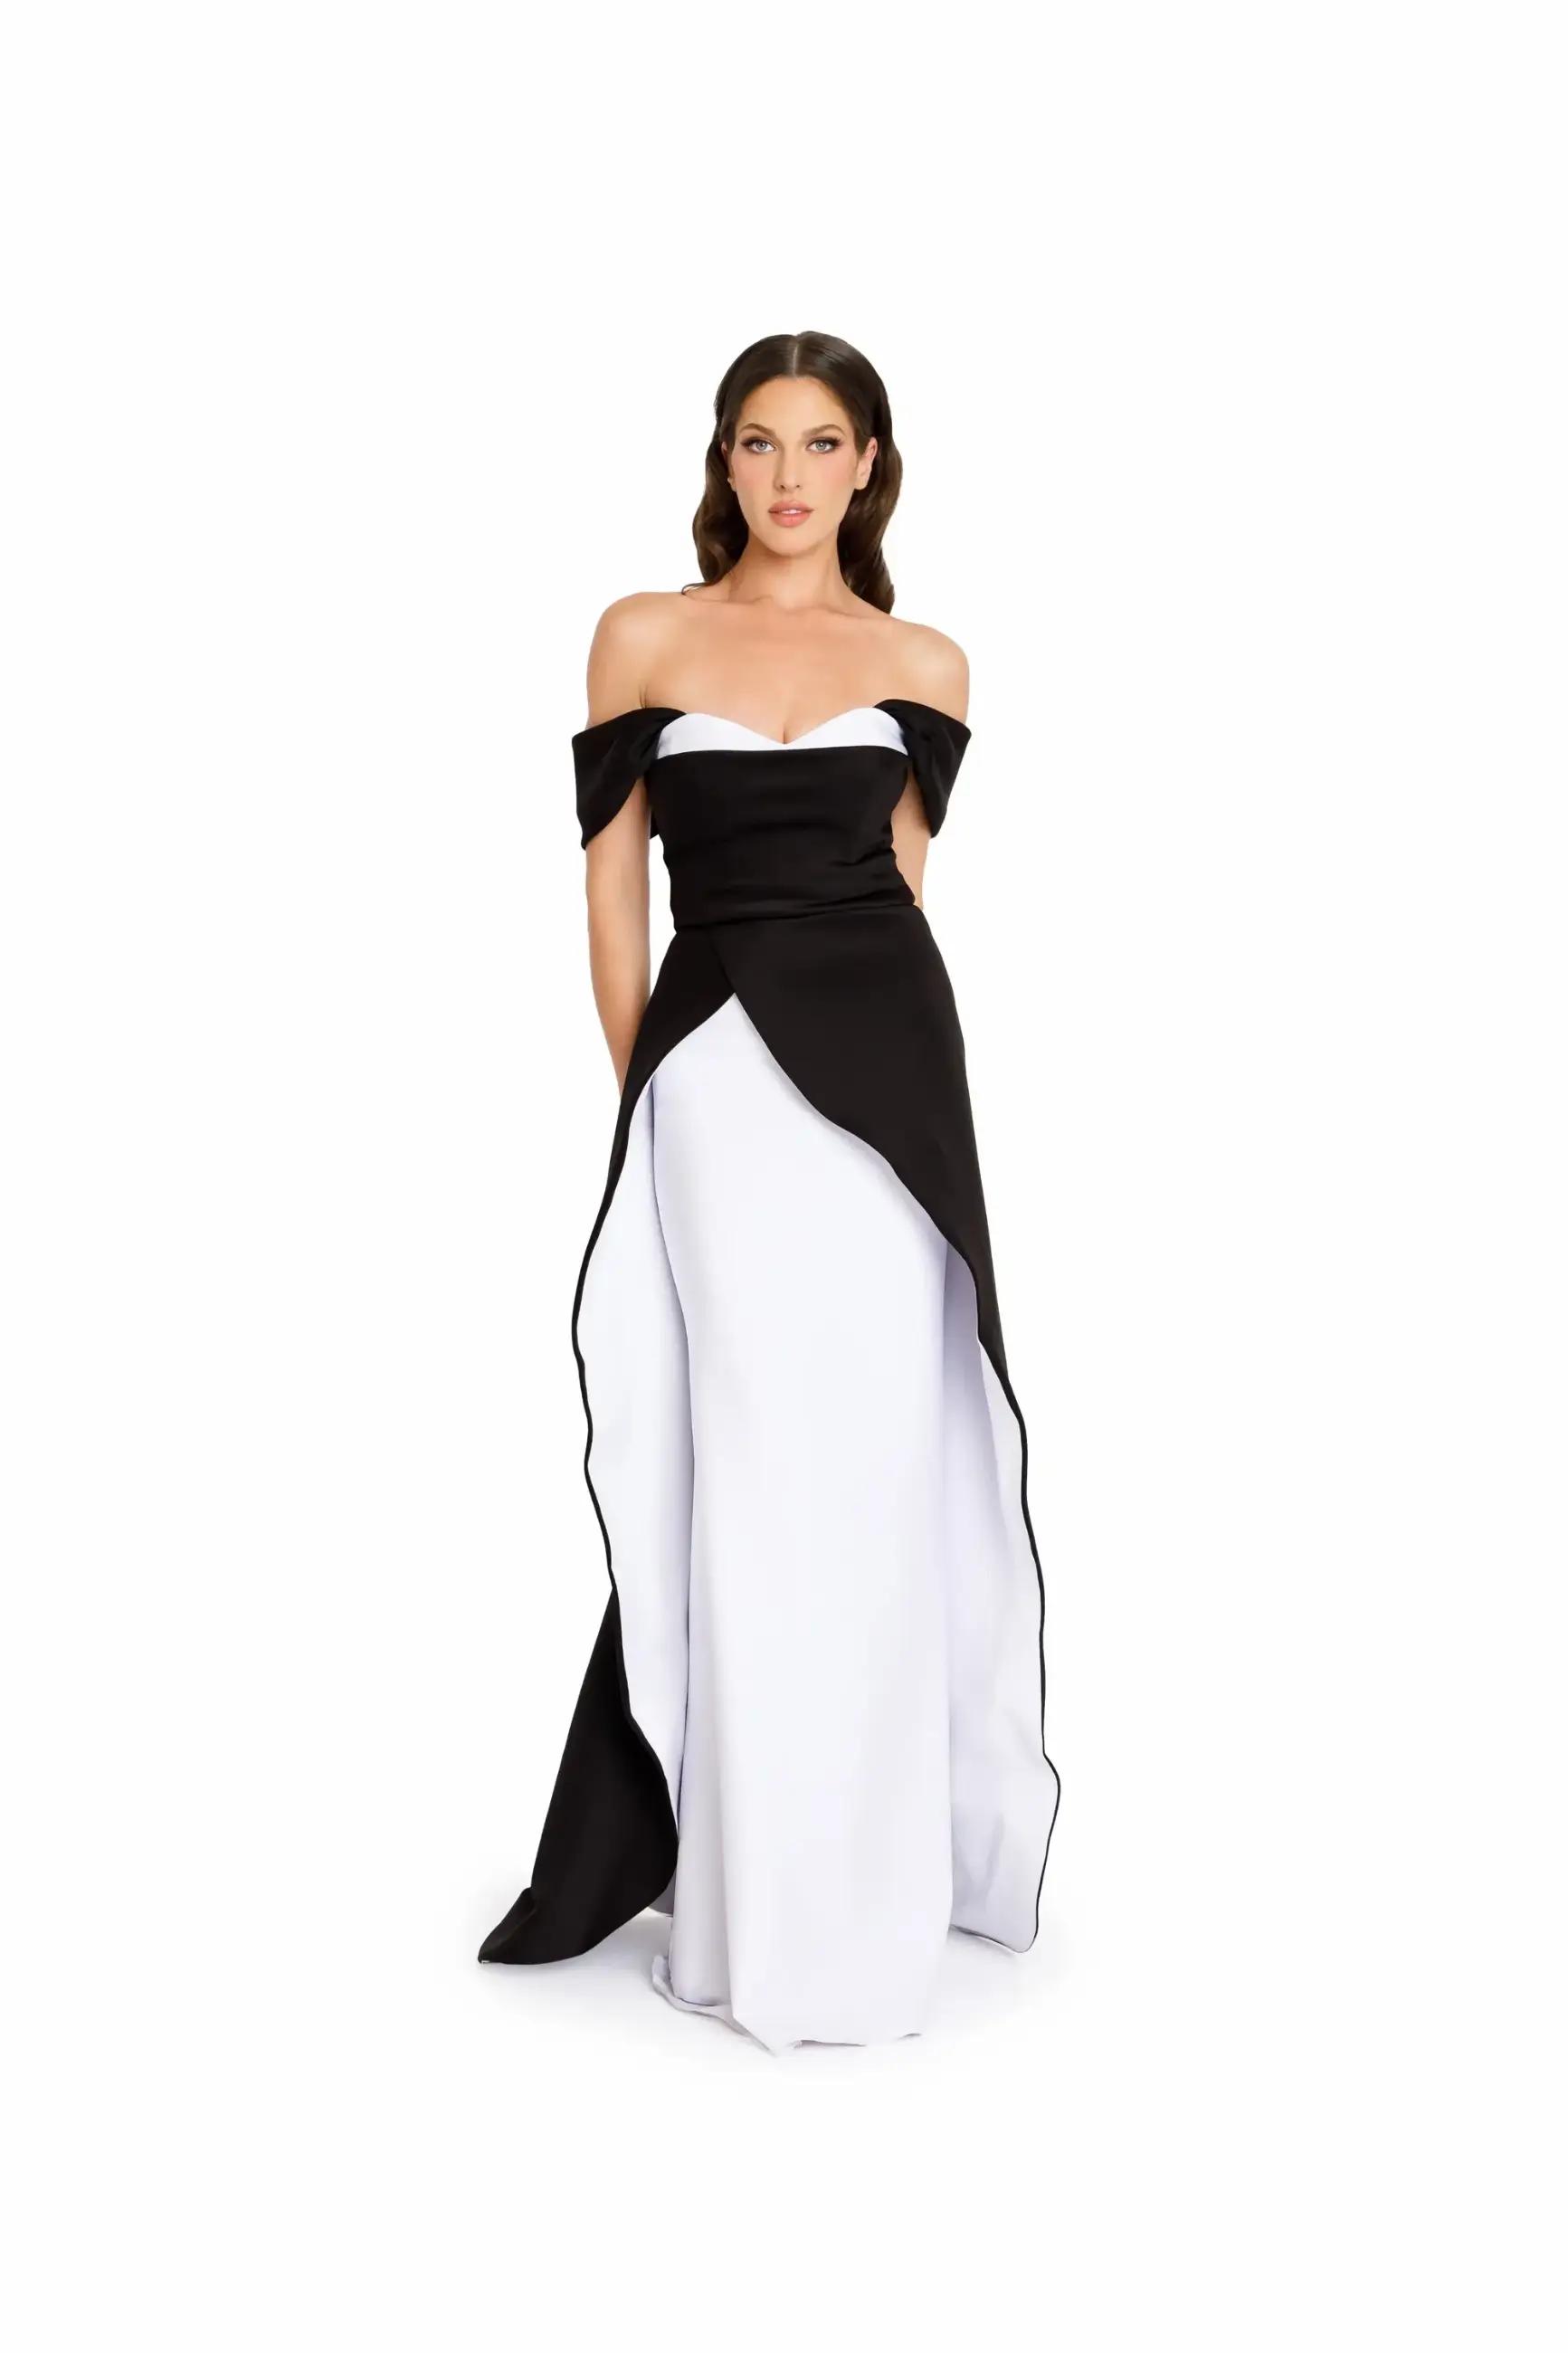 Model wearing a long black & white evening gown